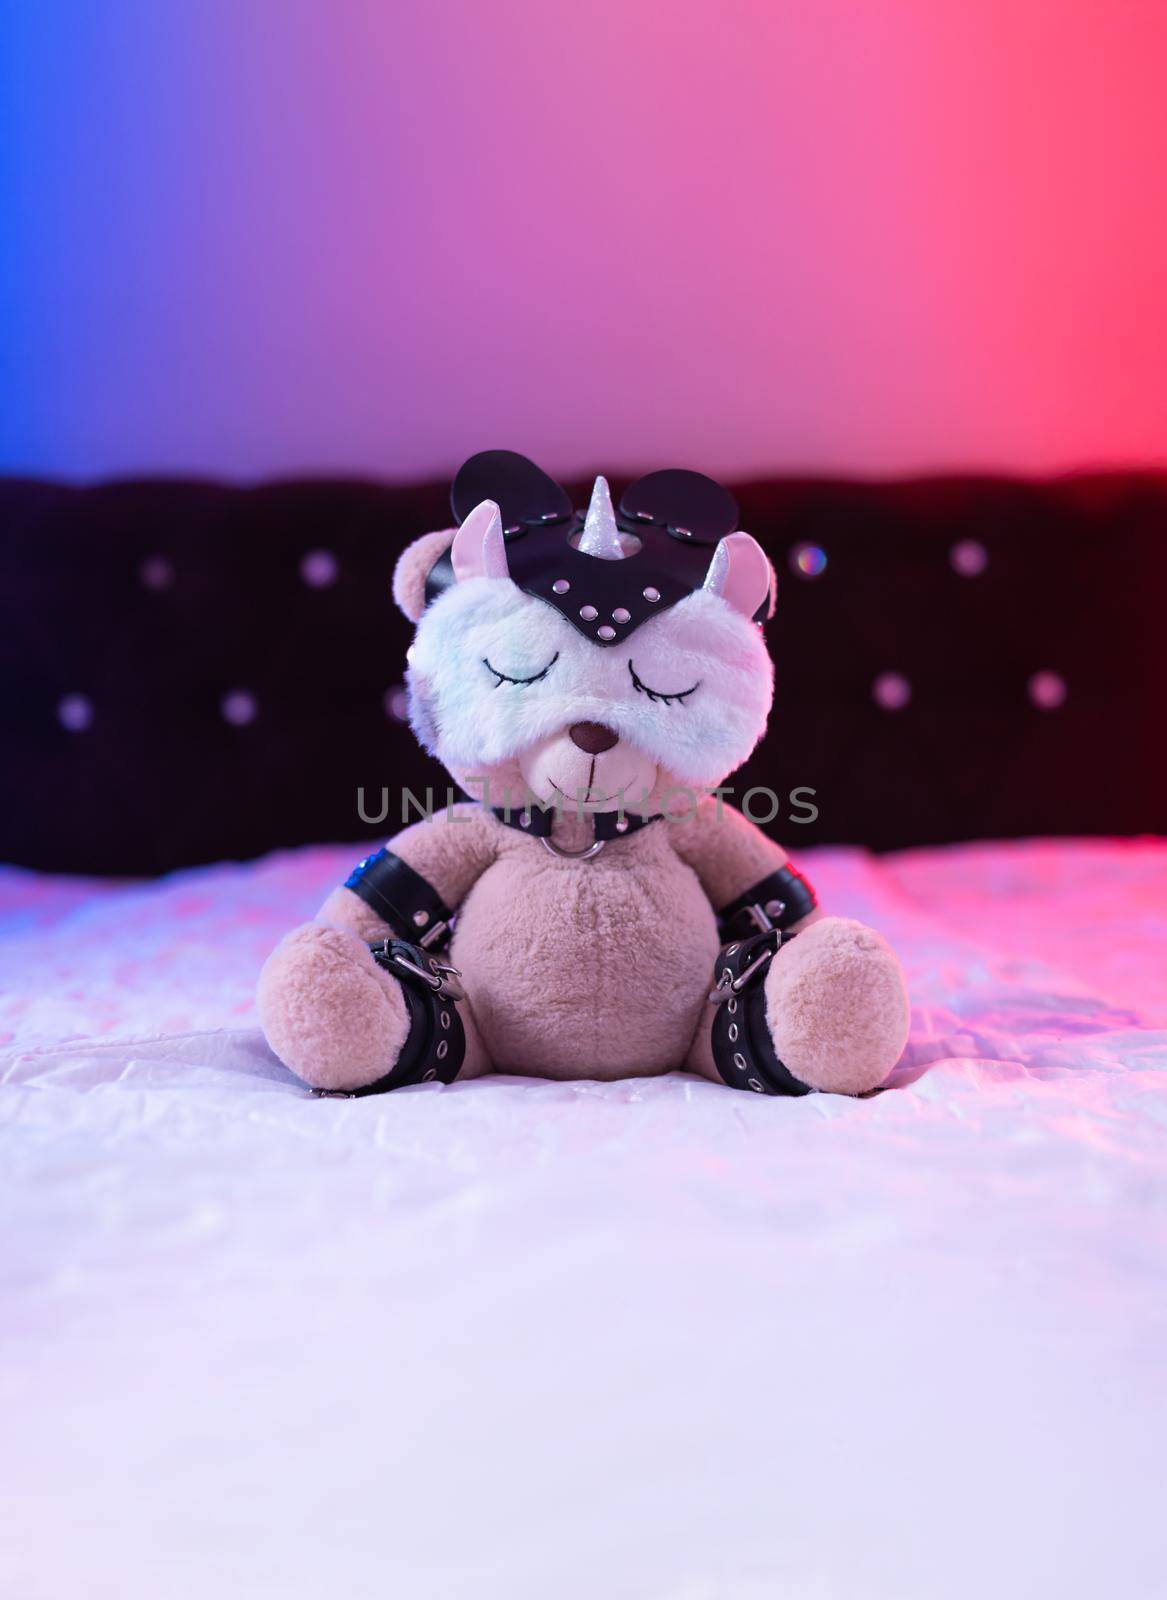 a toy teddy bear dressed in leather straps and a mask, an accessory for BDSM games in a sleep mask by Rotozey